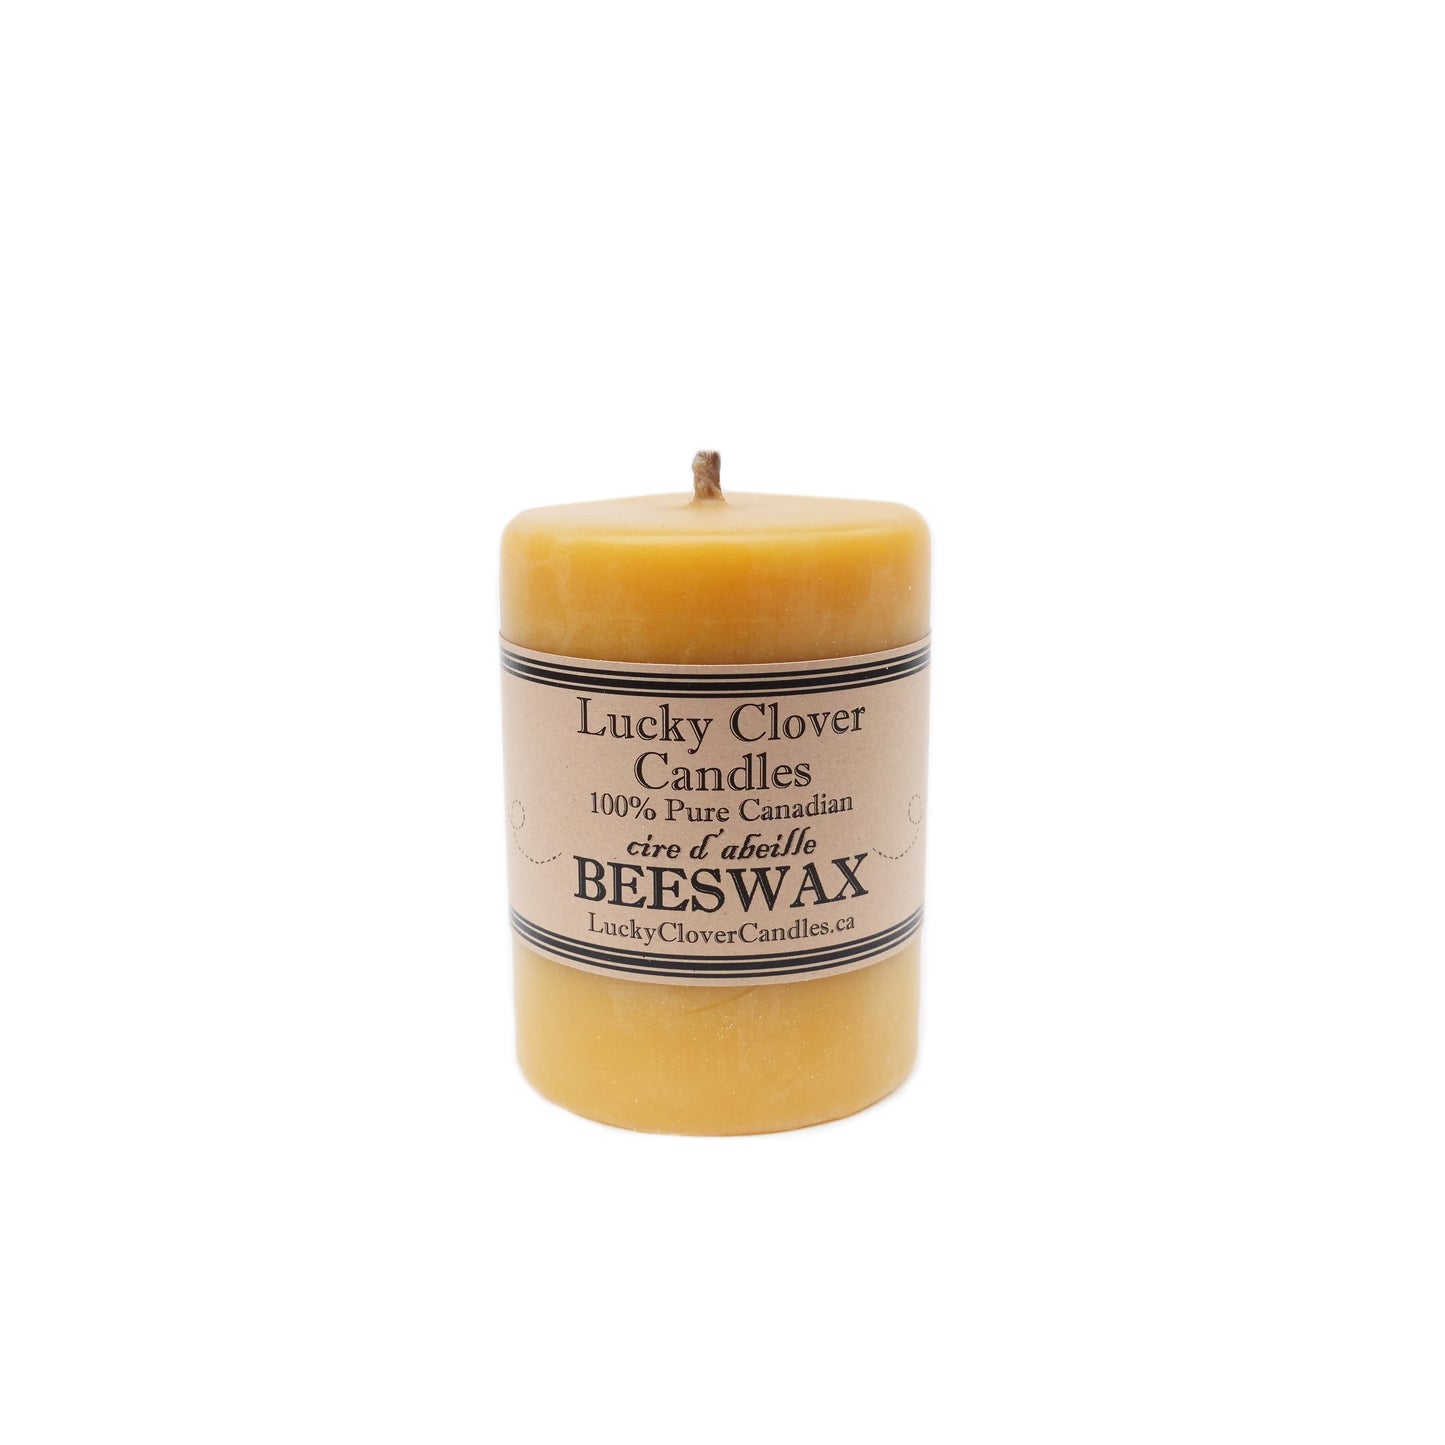 100% Smooth Beeswax Candle - 3"x4"